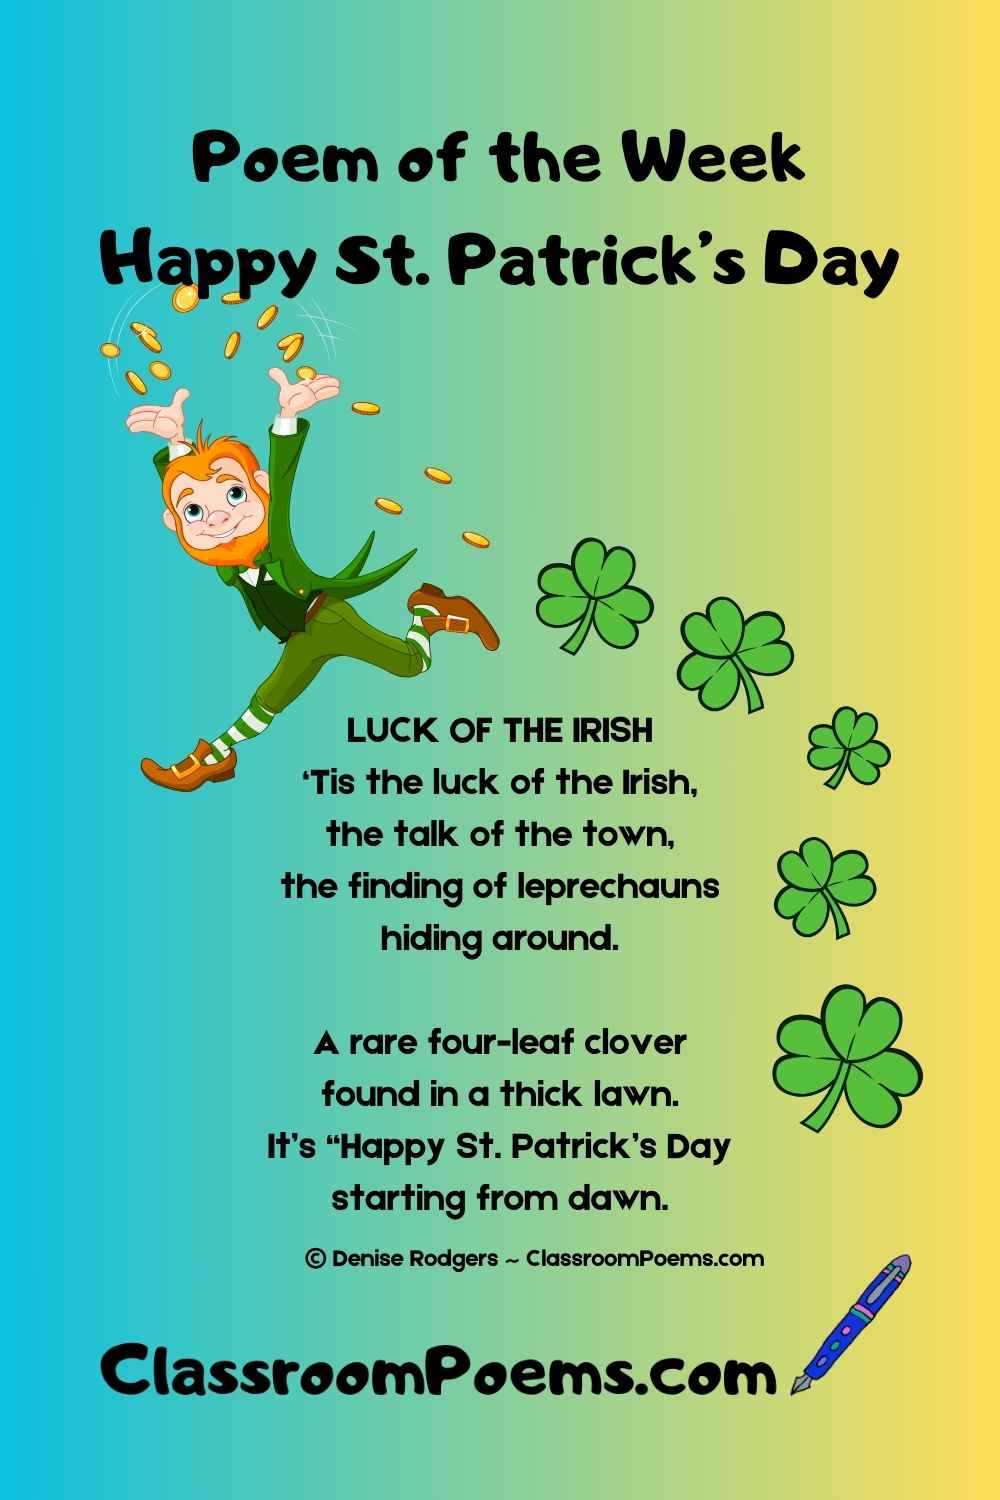 ST PATRICKS DAY poem by Denise Rodgers on ClassroomPoems.com.